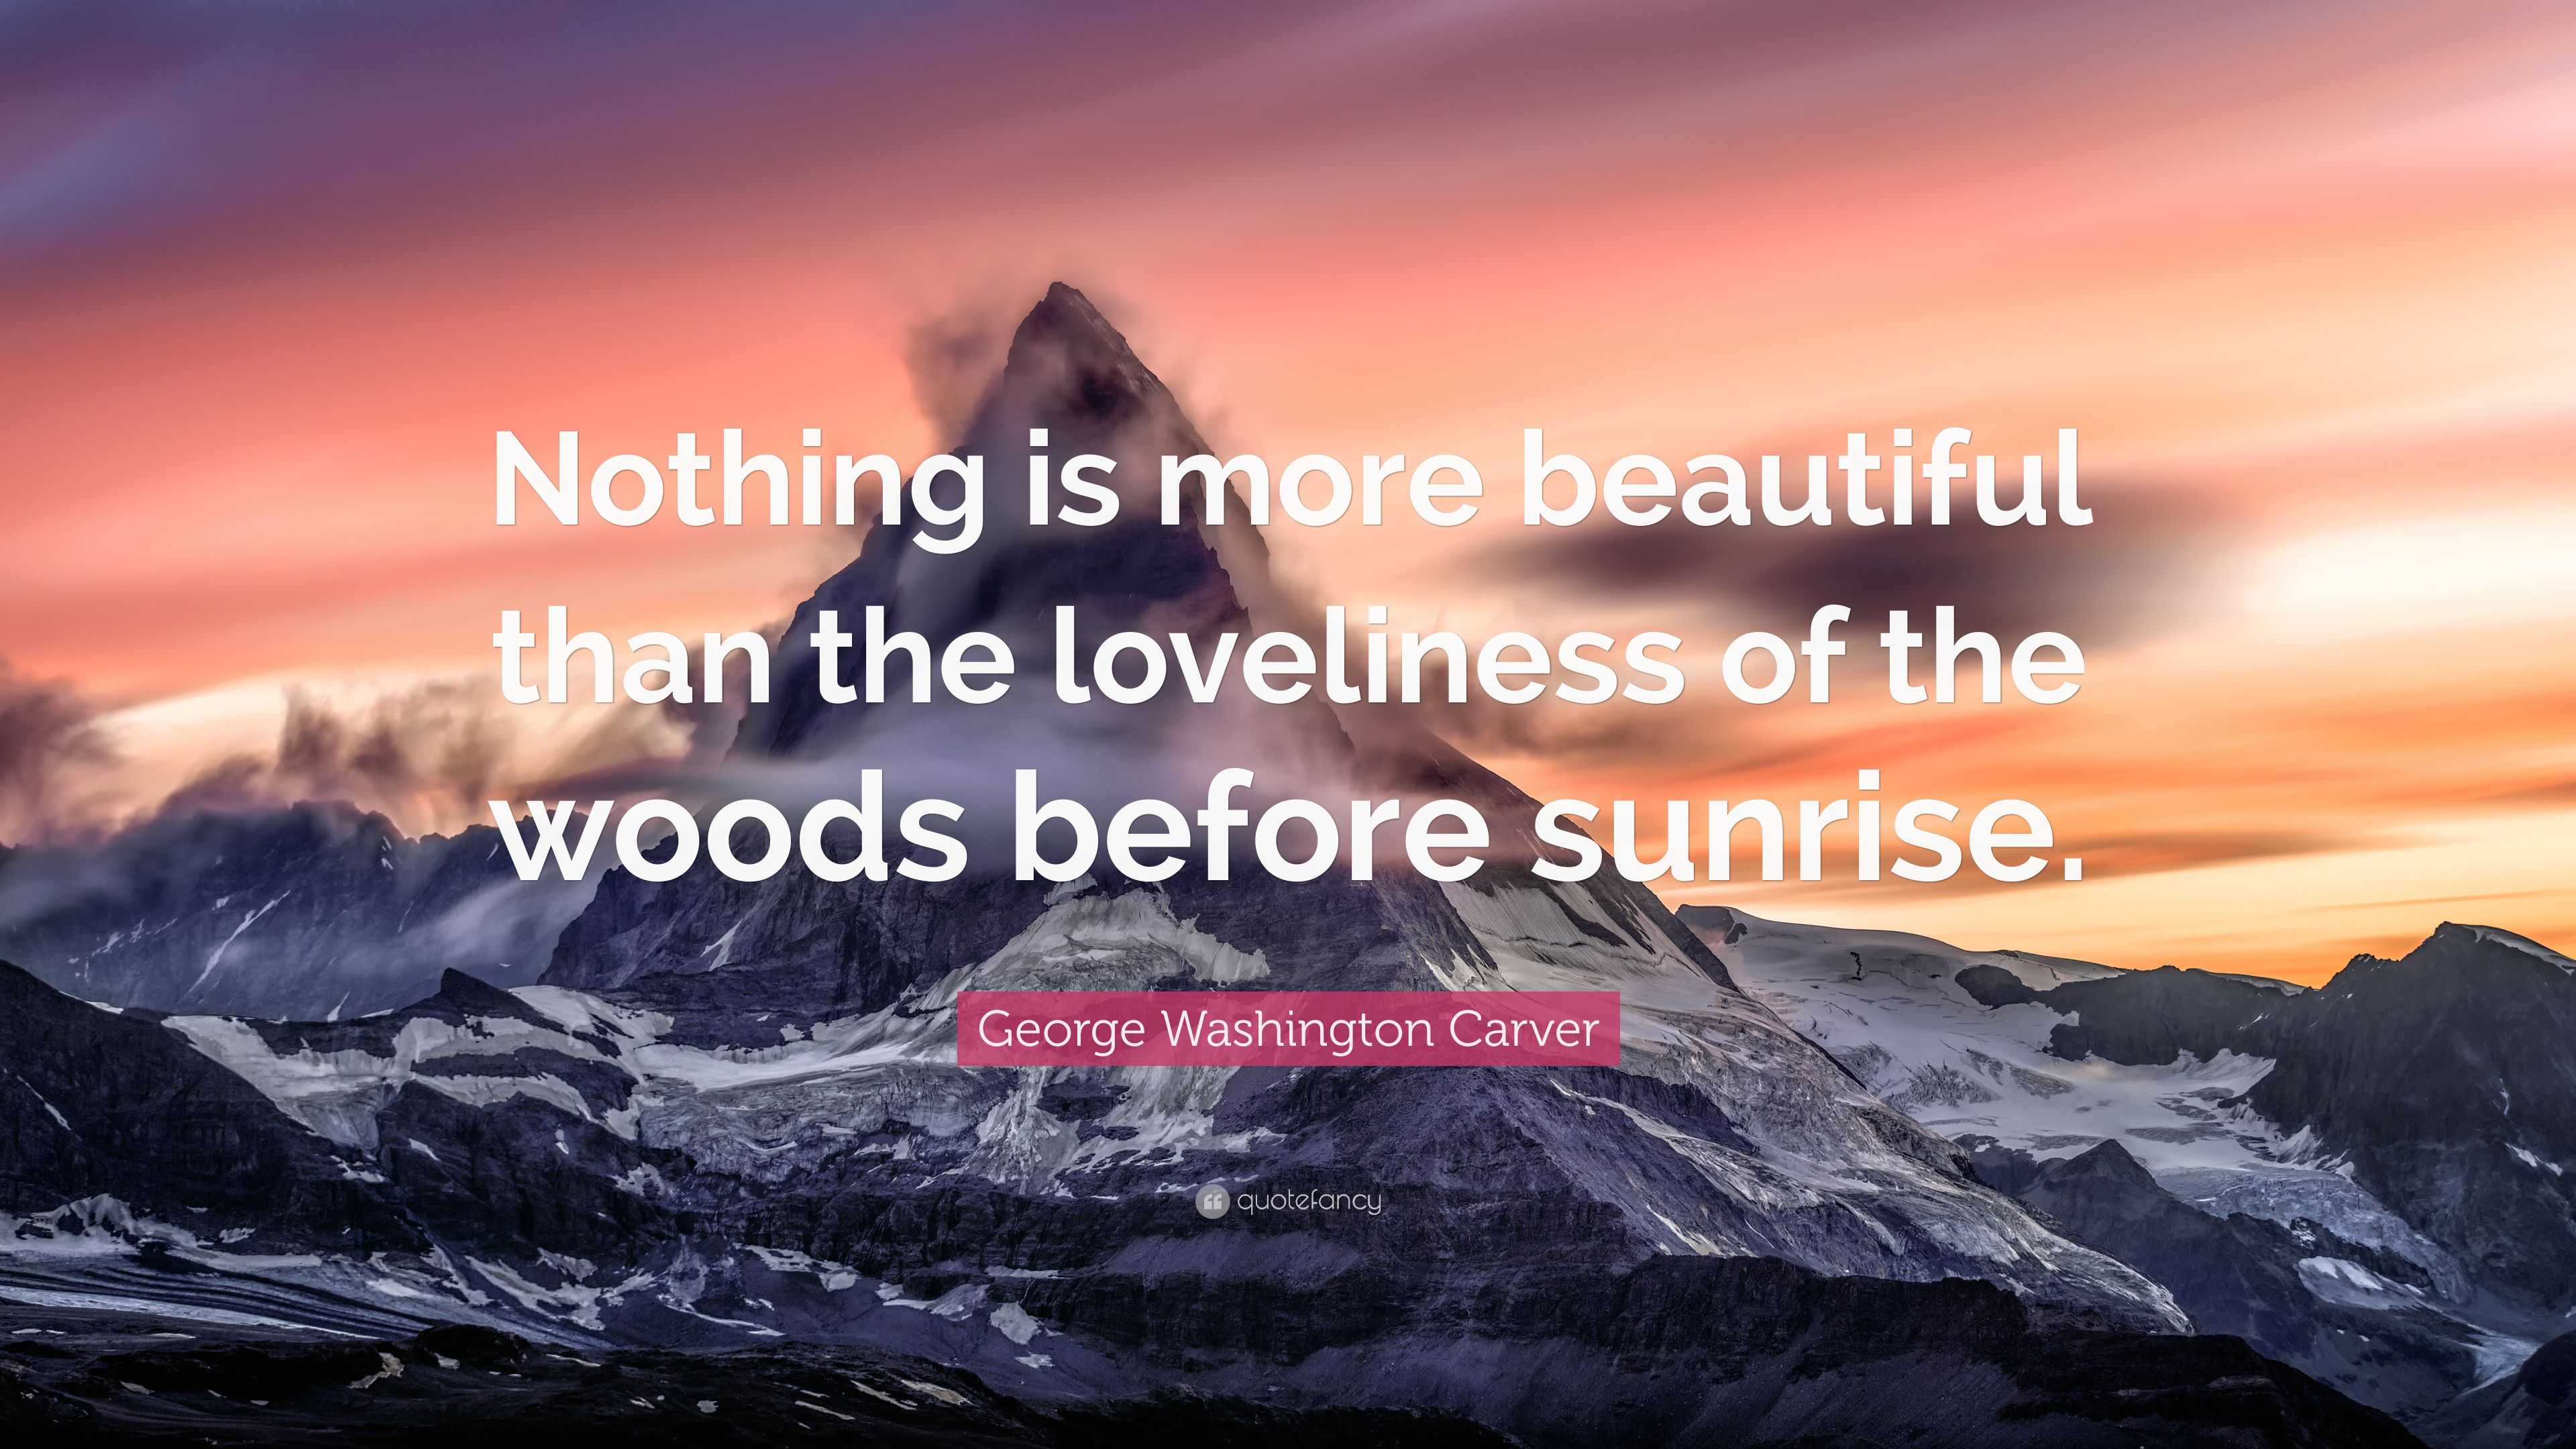 George Washington Carver Quote: “Nothing is more beautiful than the ...